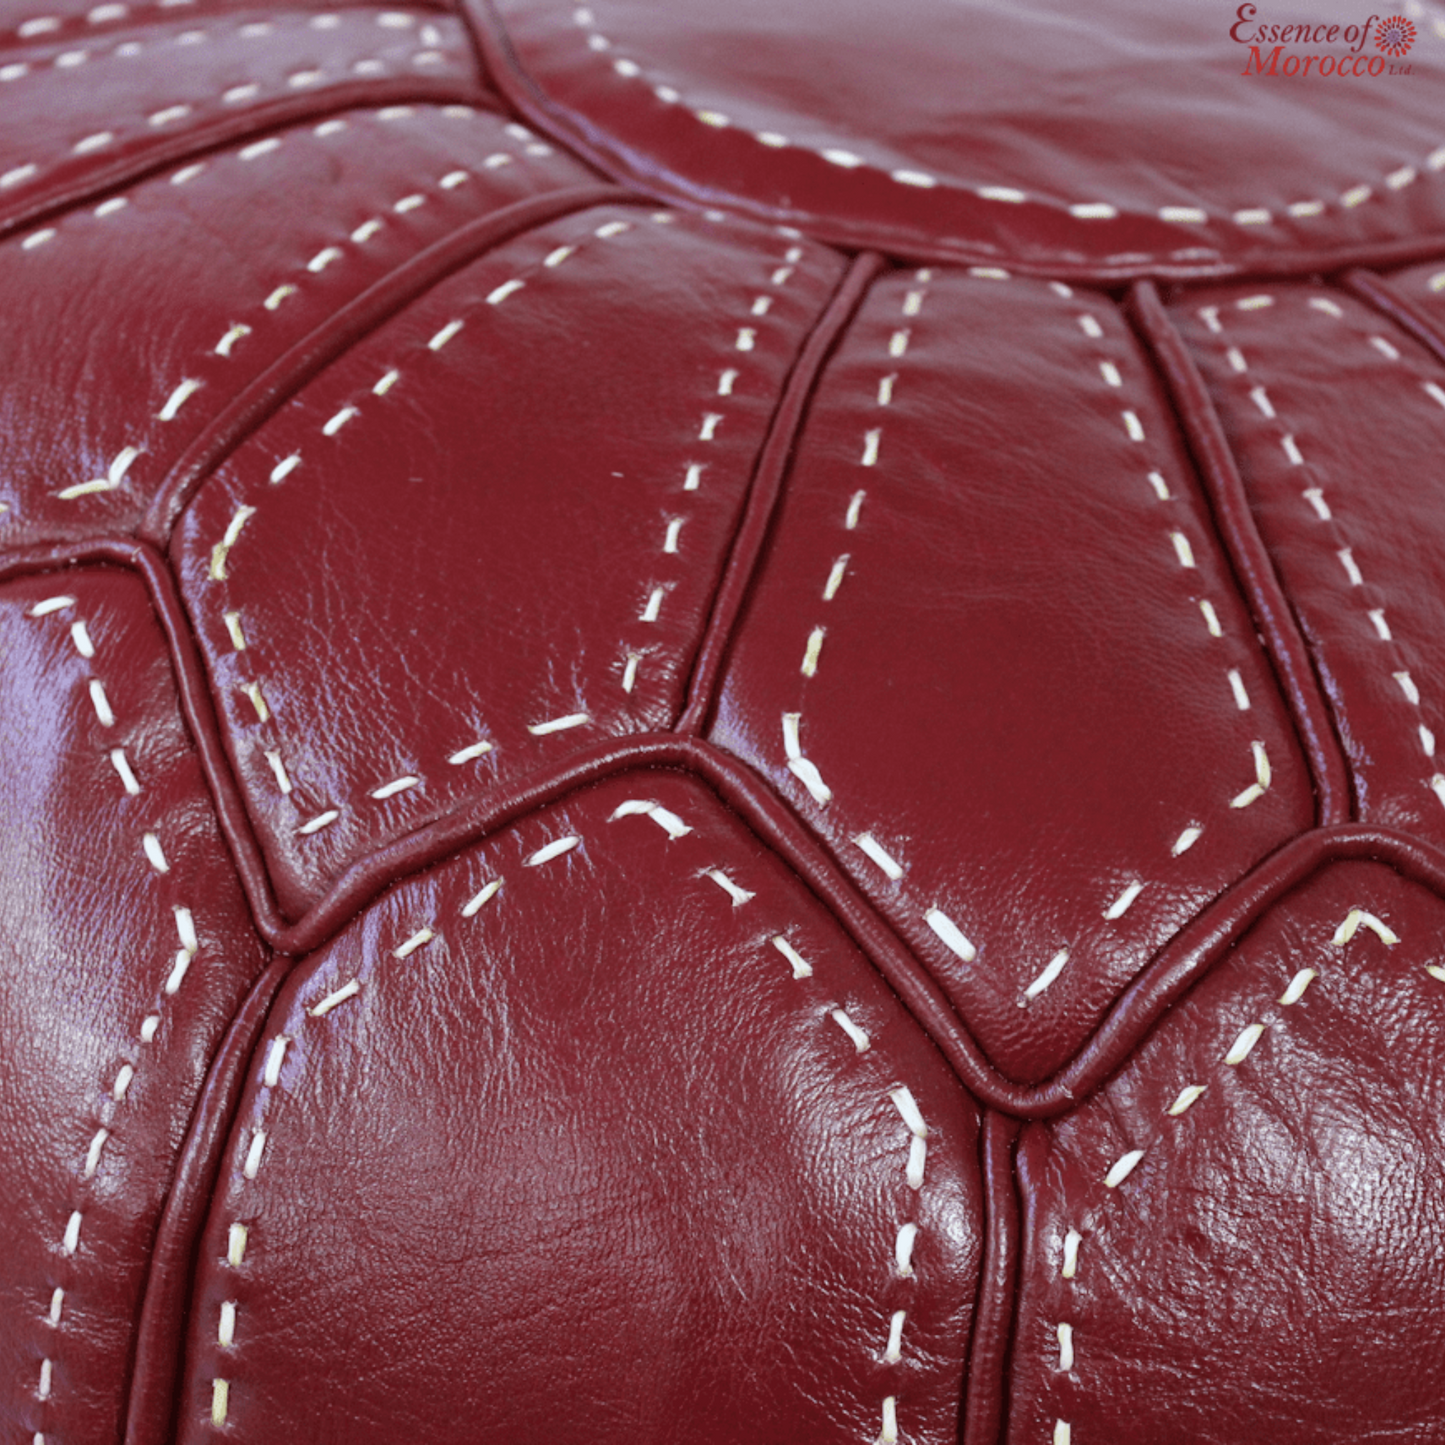 moroccan-largepouffe-pouf-ottoman-footstool-cover-only-or-stuffed-real-burgundy-leather.-handmade-cover-only-or-stuffed-cover-only